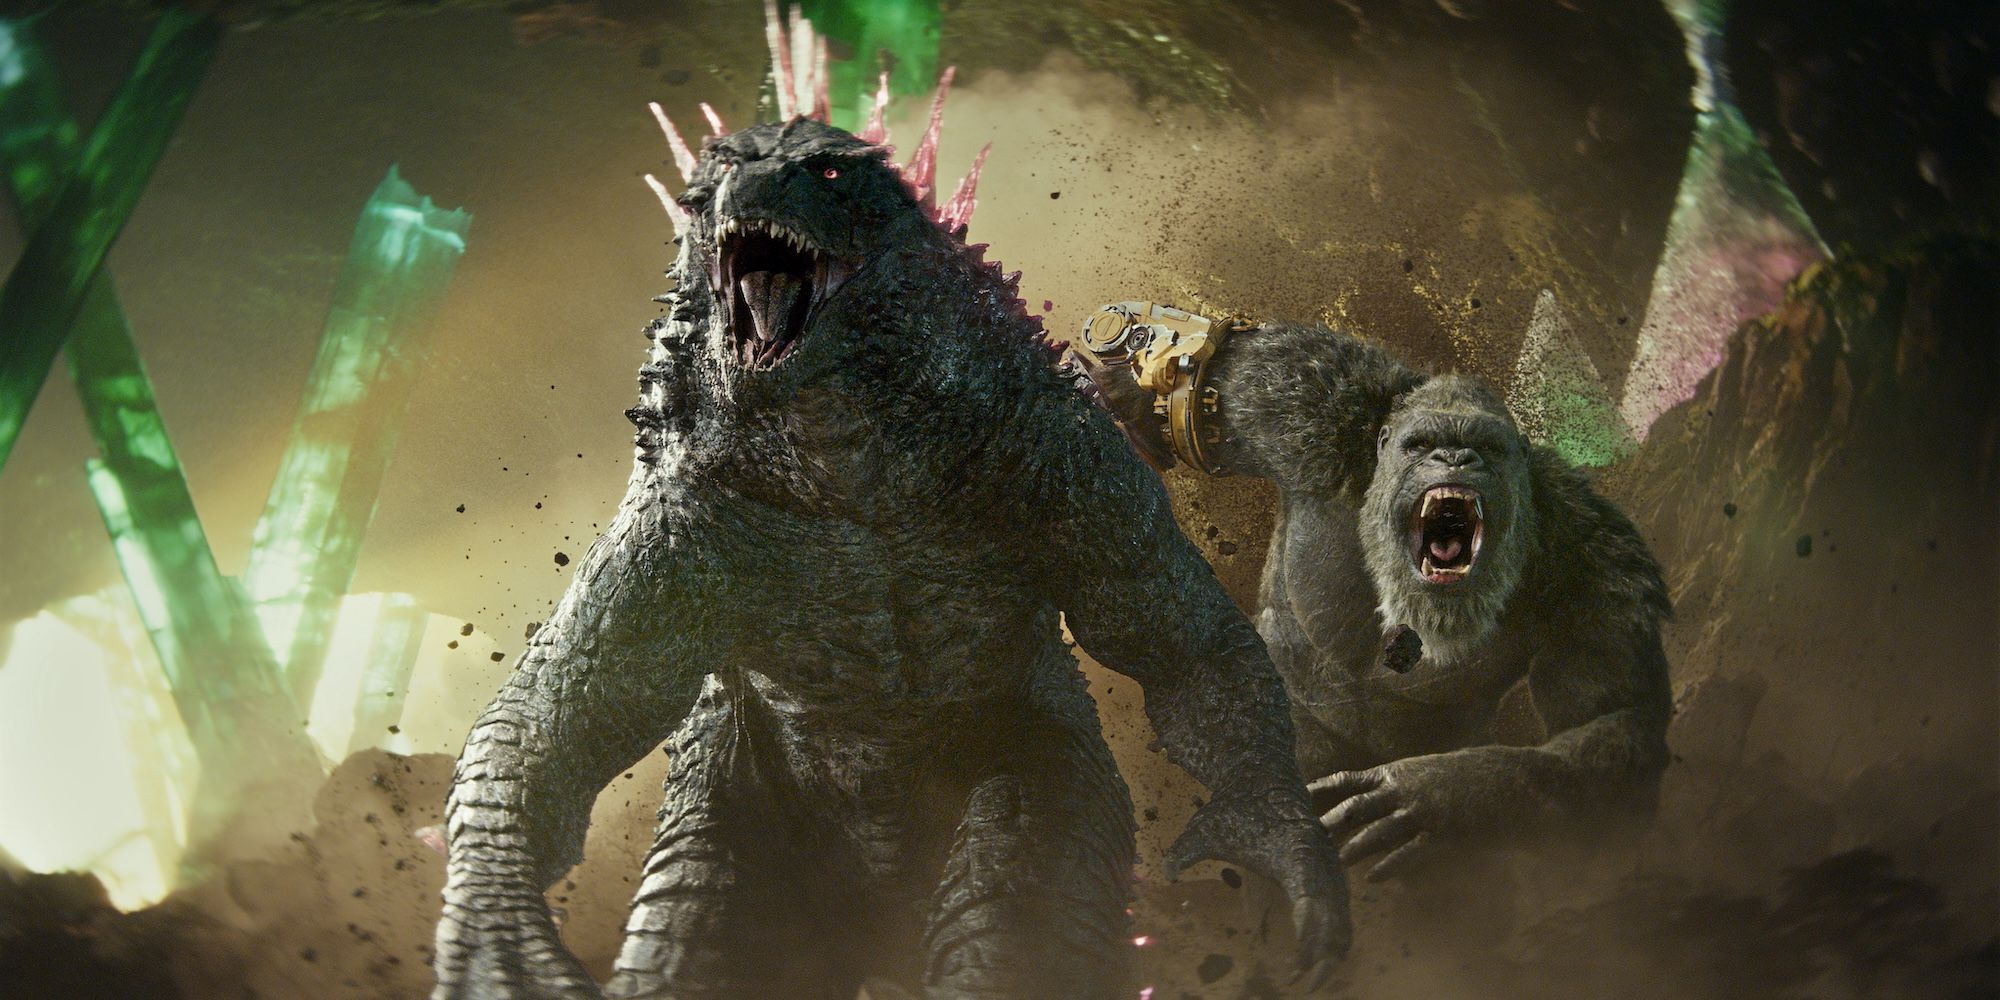 Godzilla x Kong Domestic Box Office Passes Skull Island To Become Second-Best Monsterverse Movie